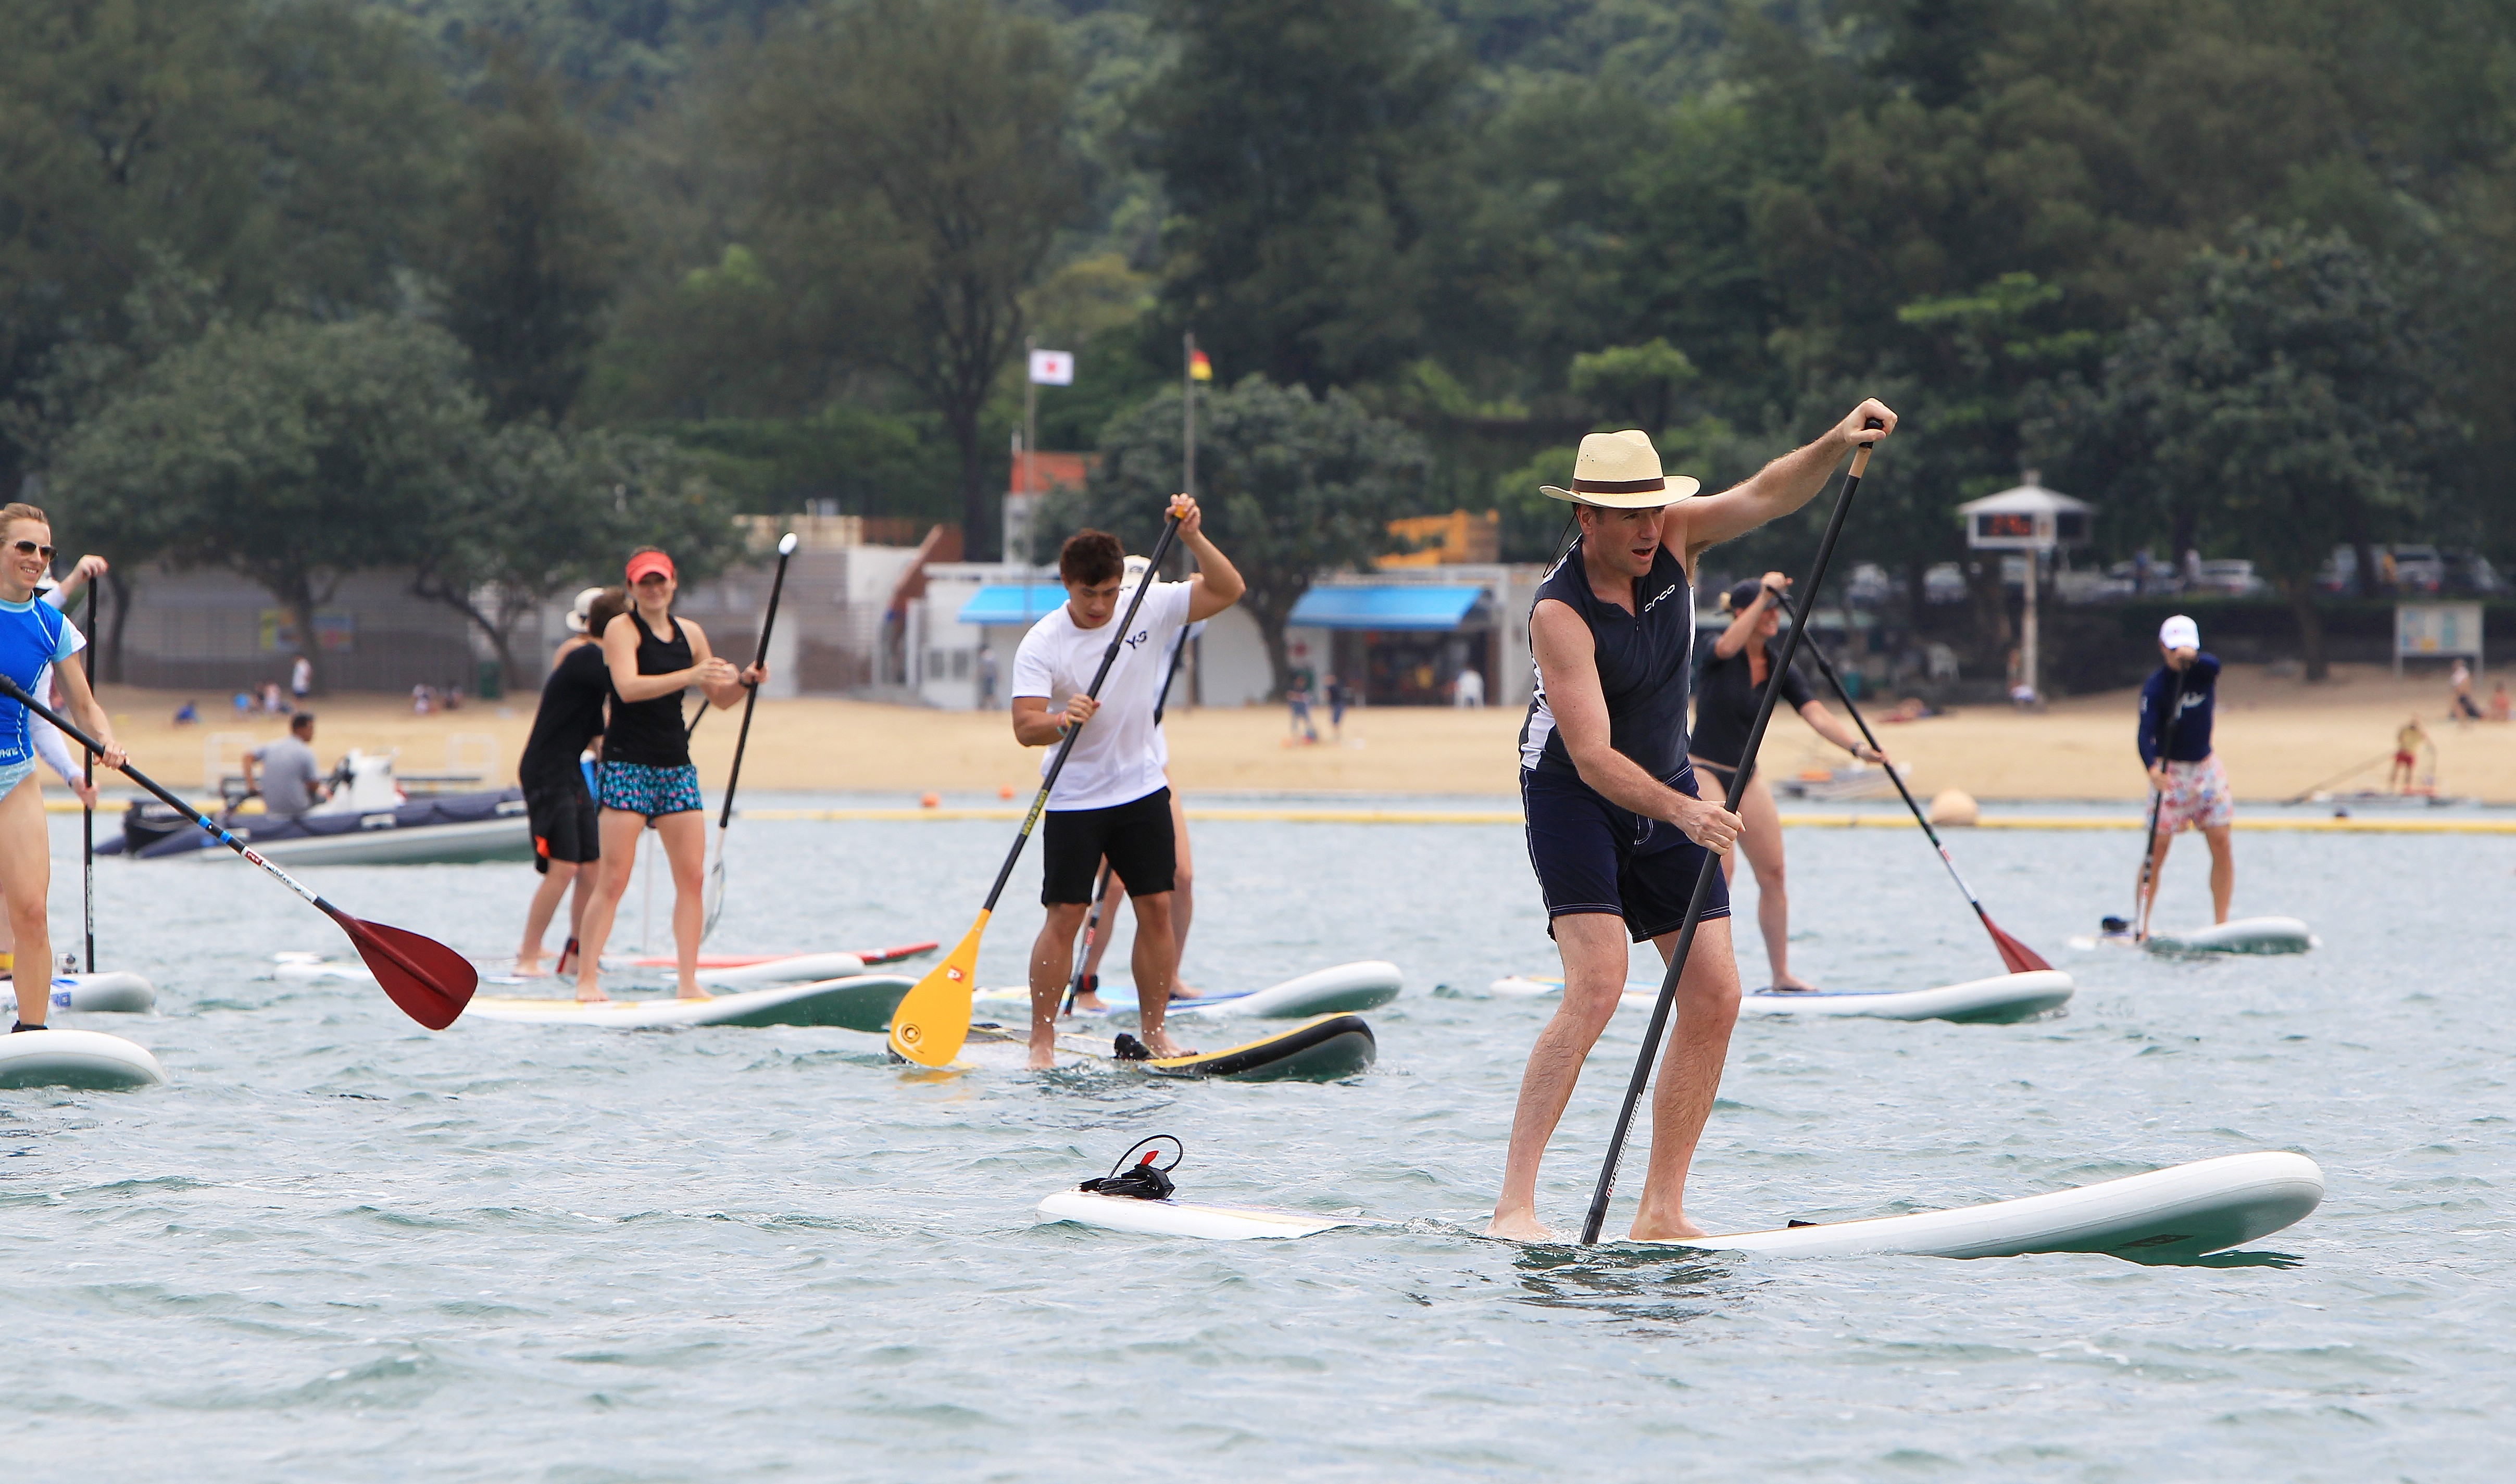 Stand-up paddlers participate in an event held at the Victoria Recreation Club in Deep Water Bay. The club is a base for outrigger canoeing, dragon boating and paddle boarding. Photo: Jonathan Wong